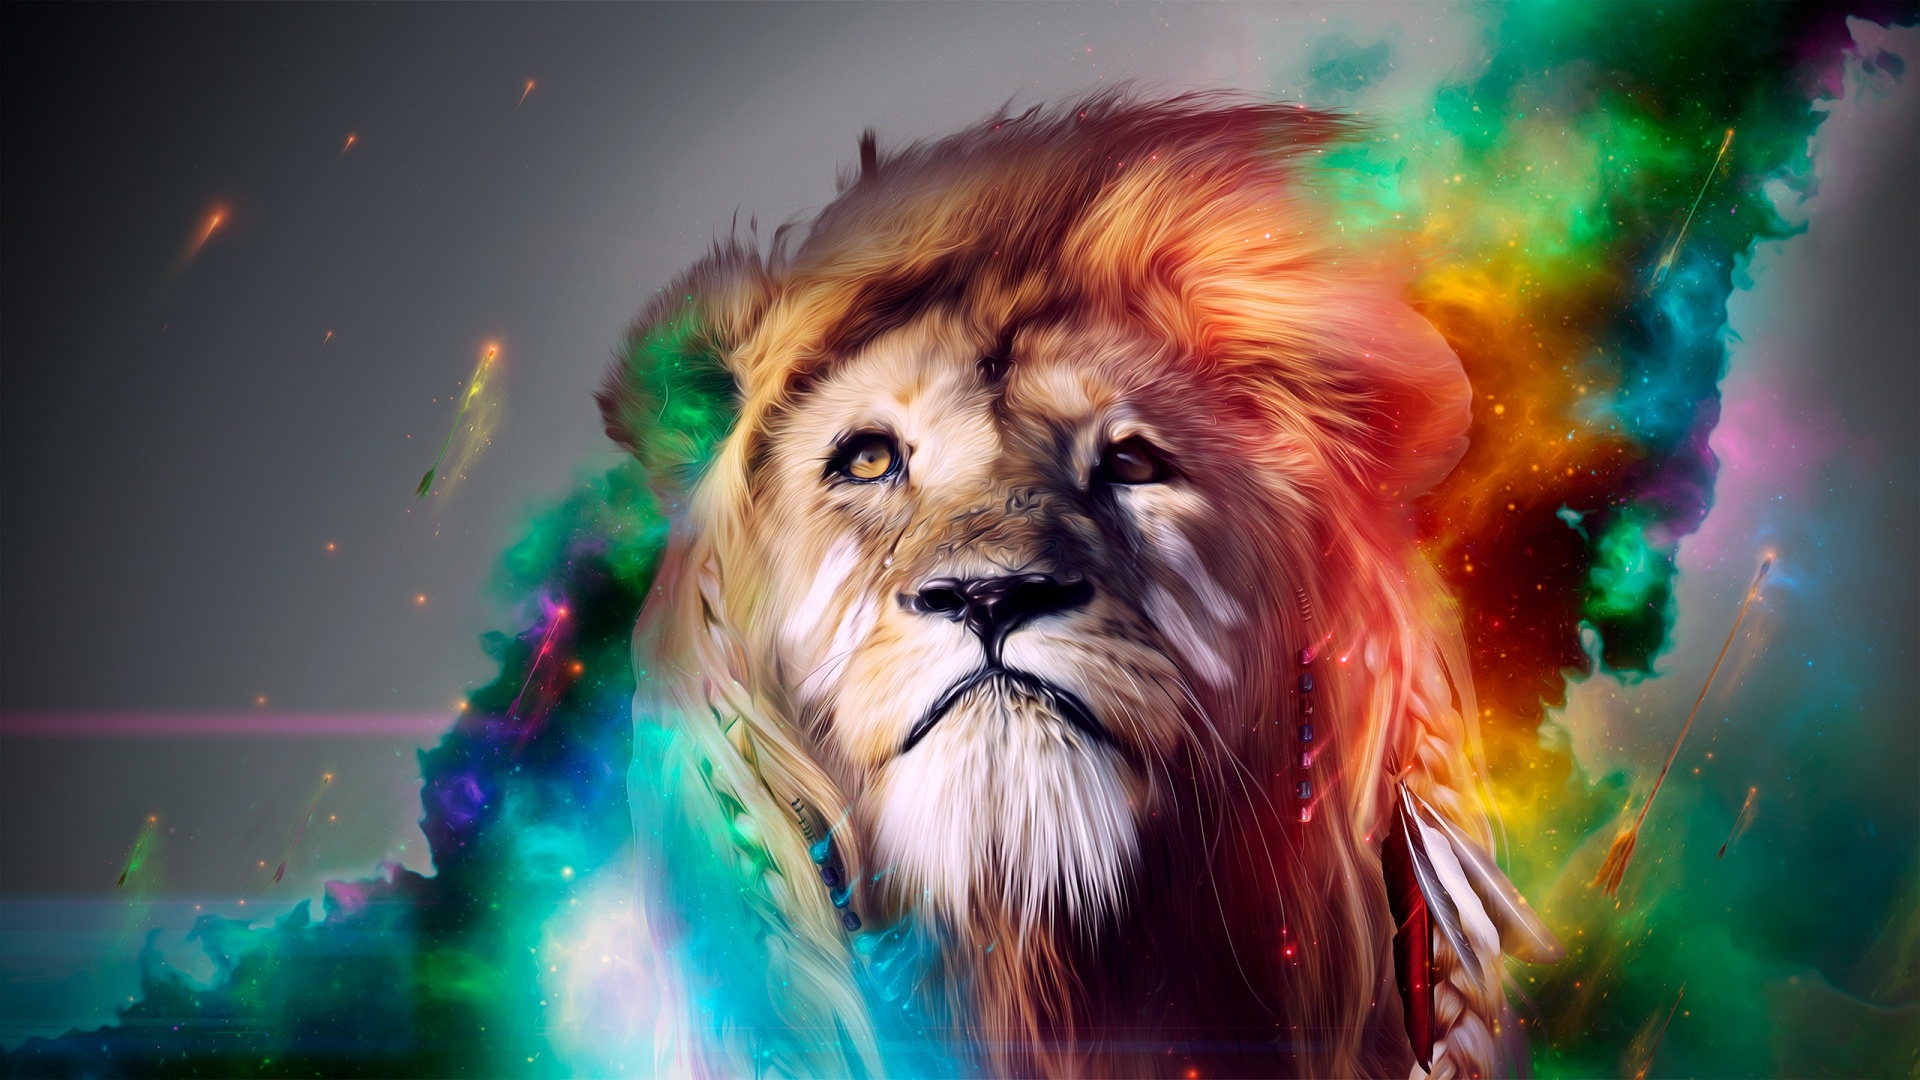 Lion Abstract Wallpaper Hd Abstract